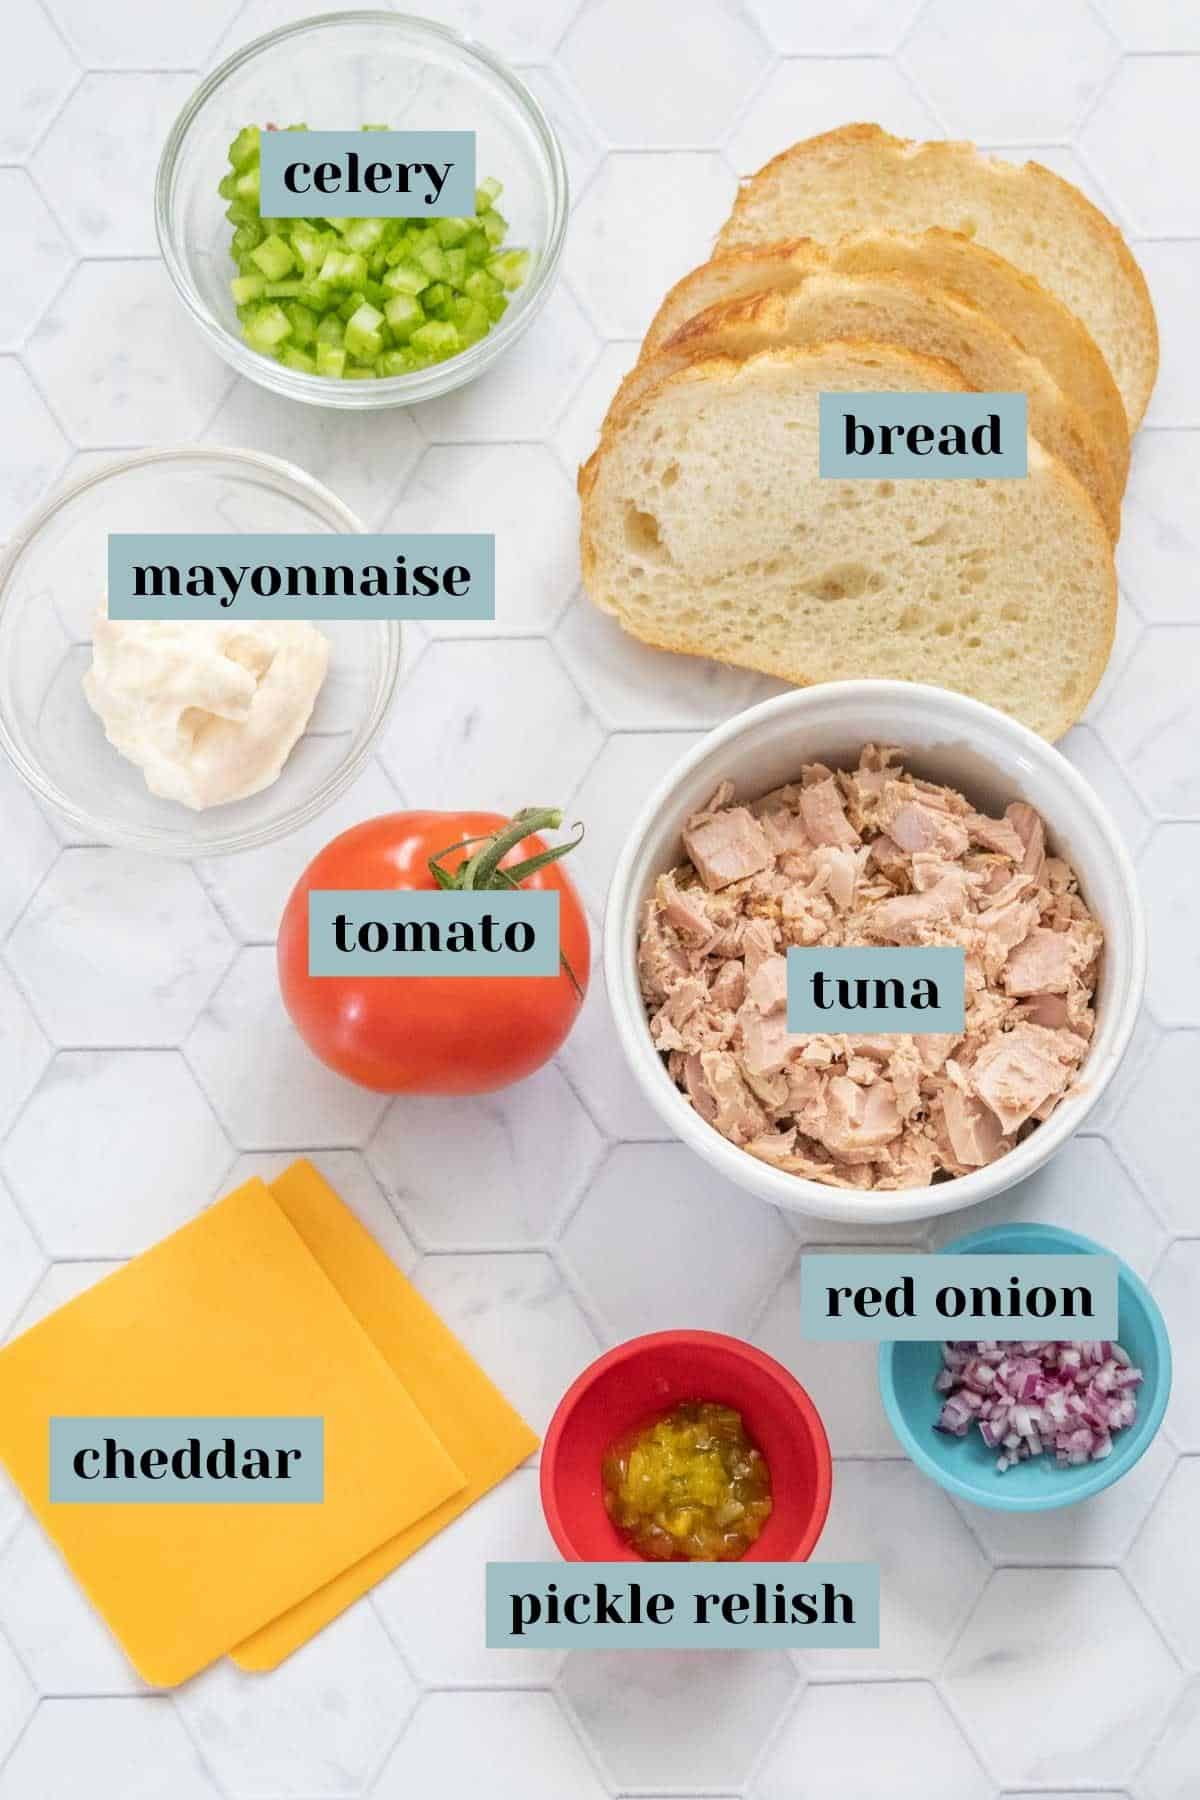 Ingredients for tuna melt sandwich on tile surface with labels.